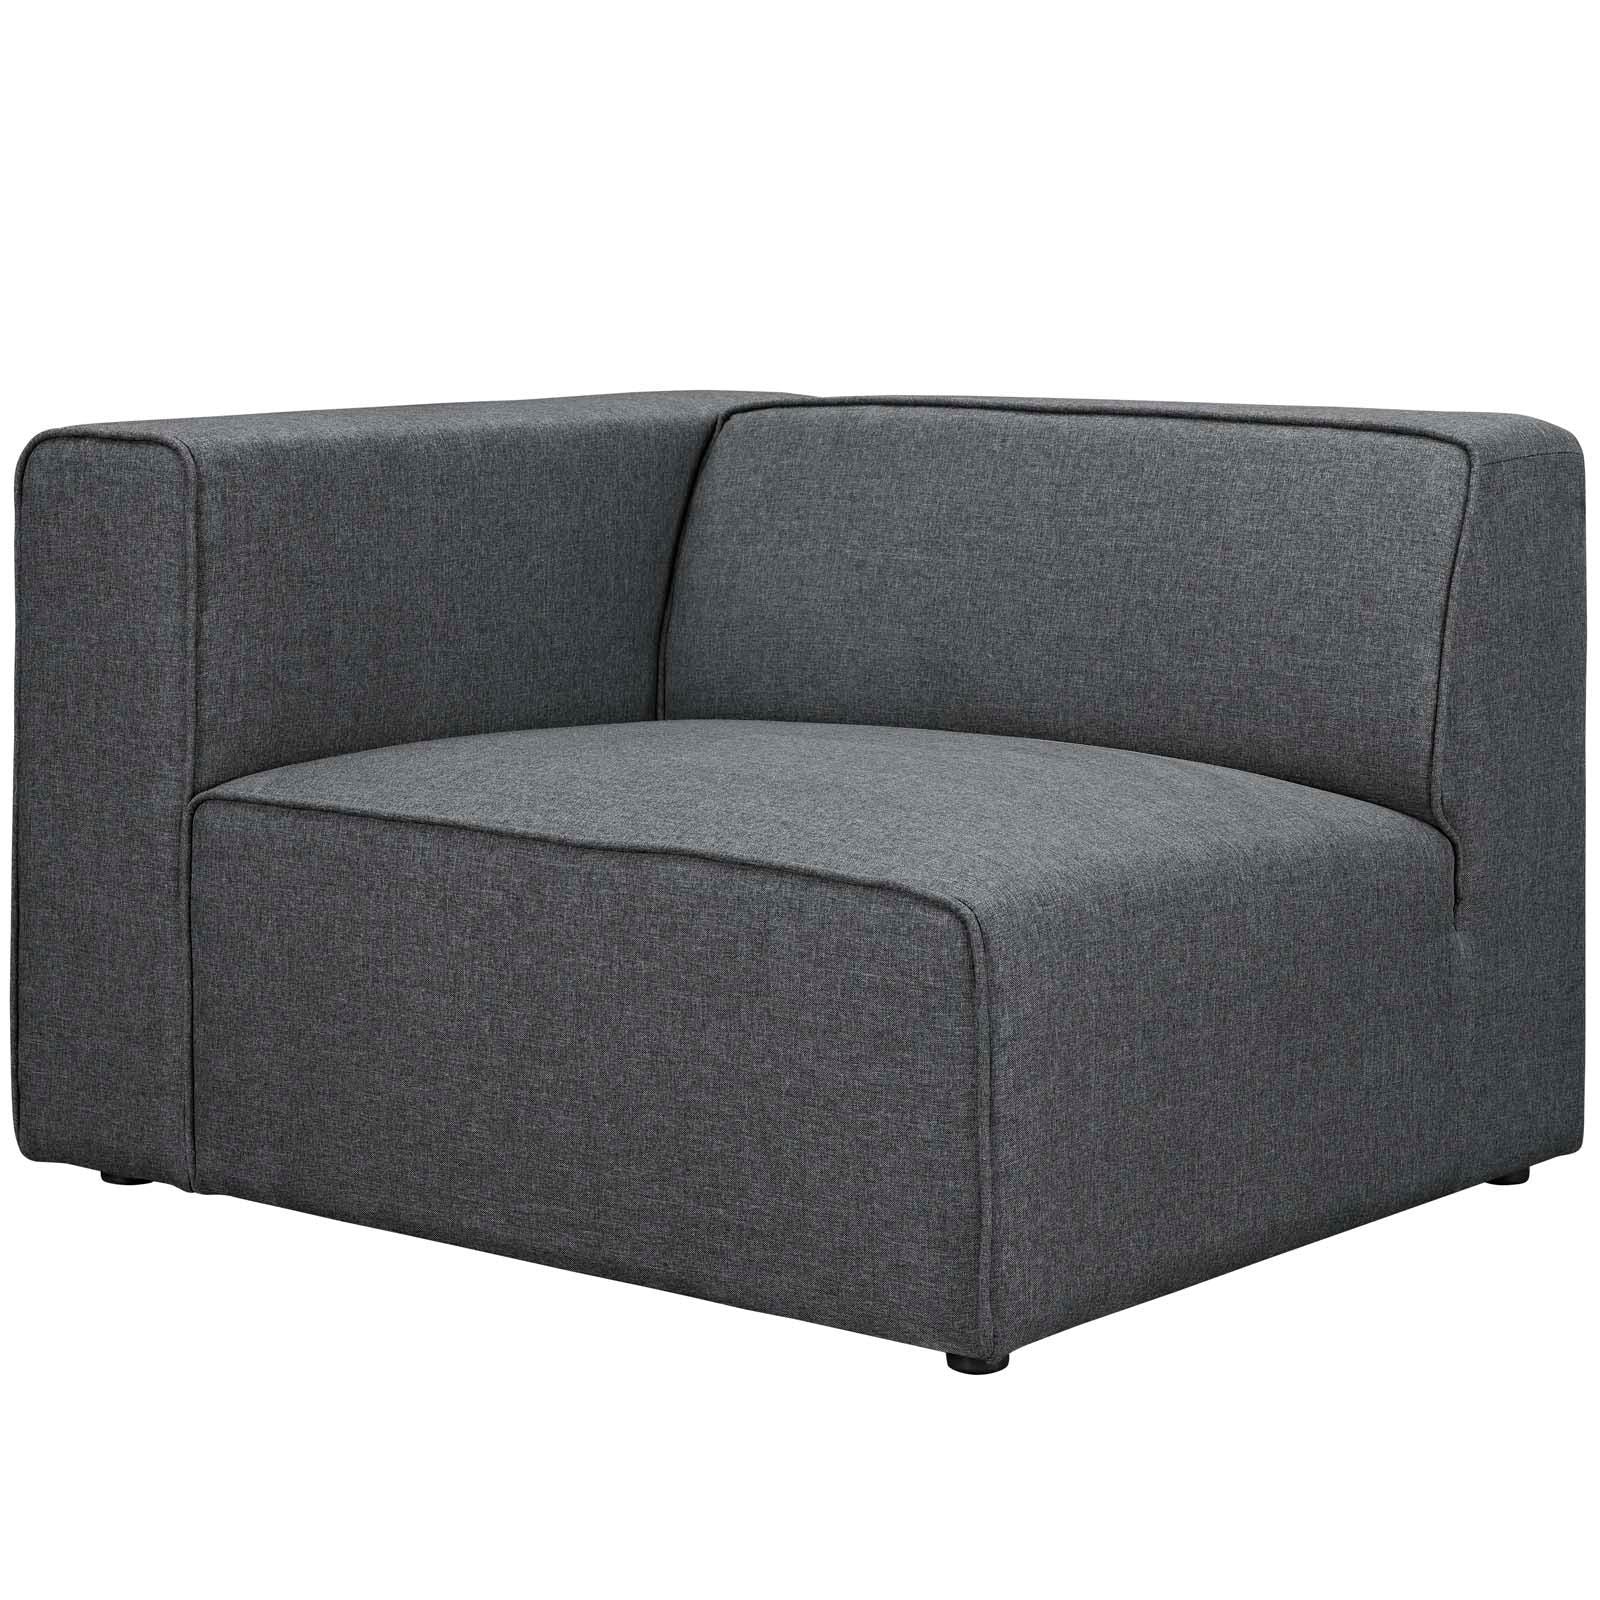 Modway Accent Chairs - Mingle Fabric Left-Facing Sofa Gray